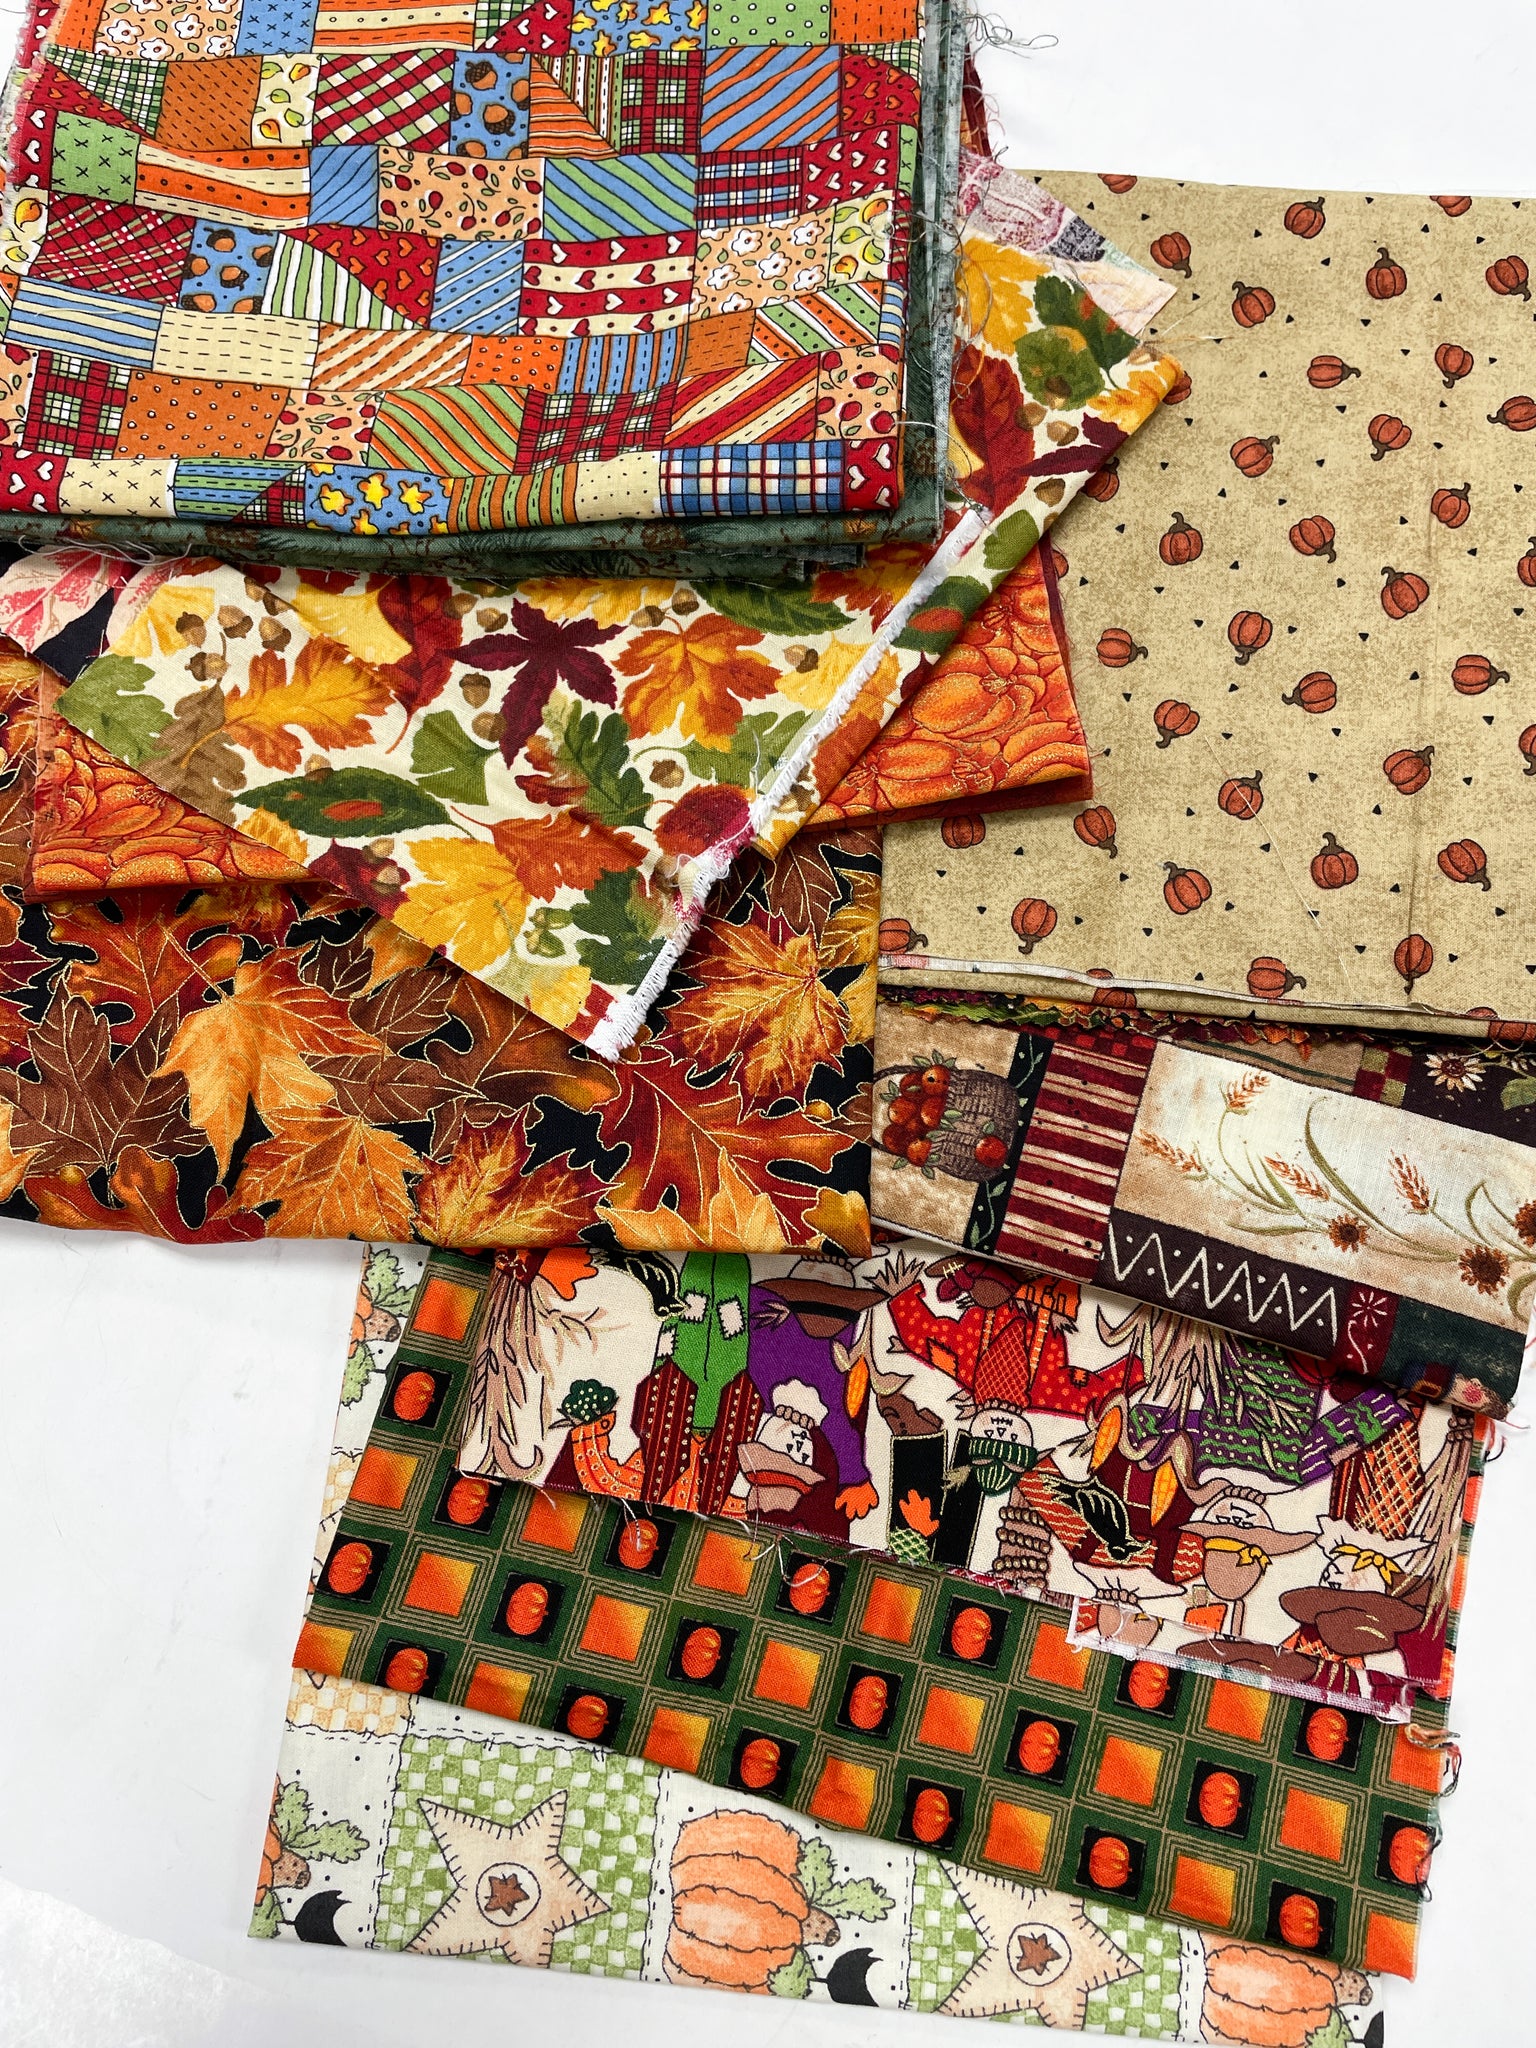 Quilting Cotton Mystery Scrap Remnant Bundle - Autumn/Fall/Thanksgiving 1 POUND